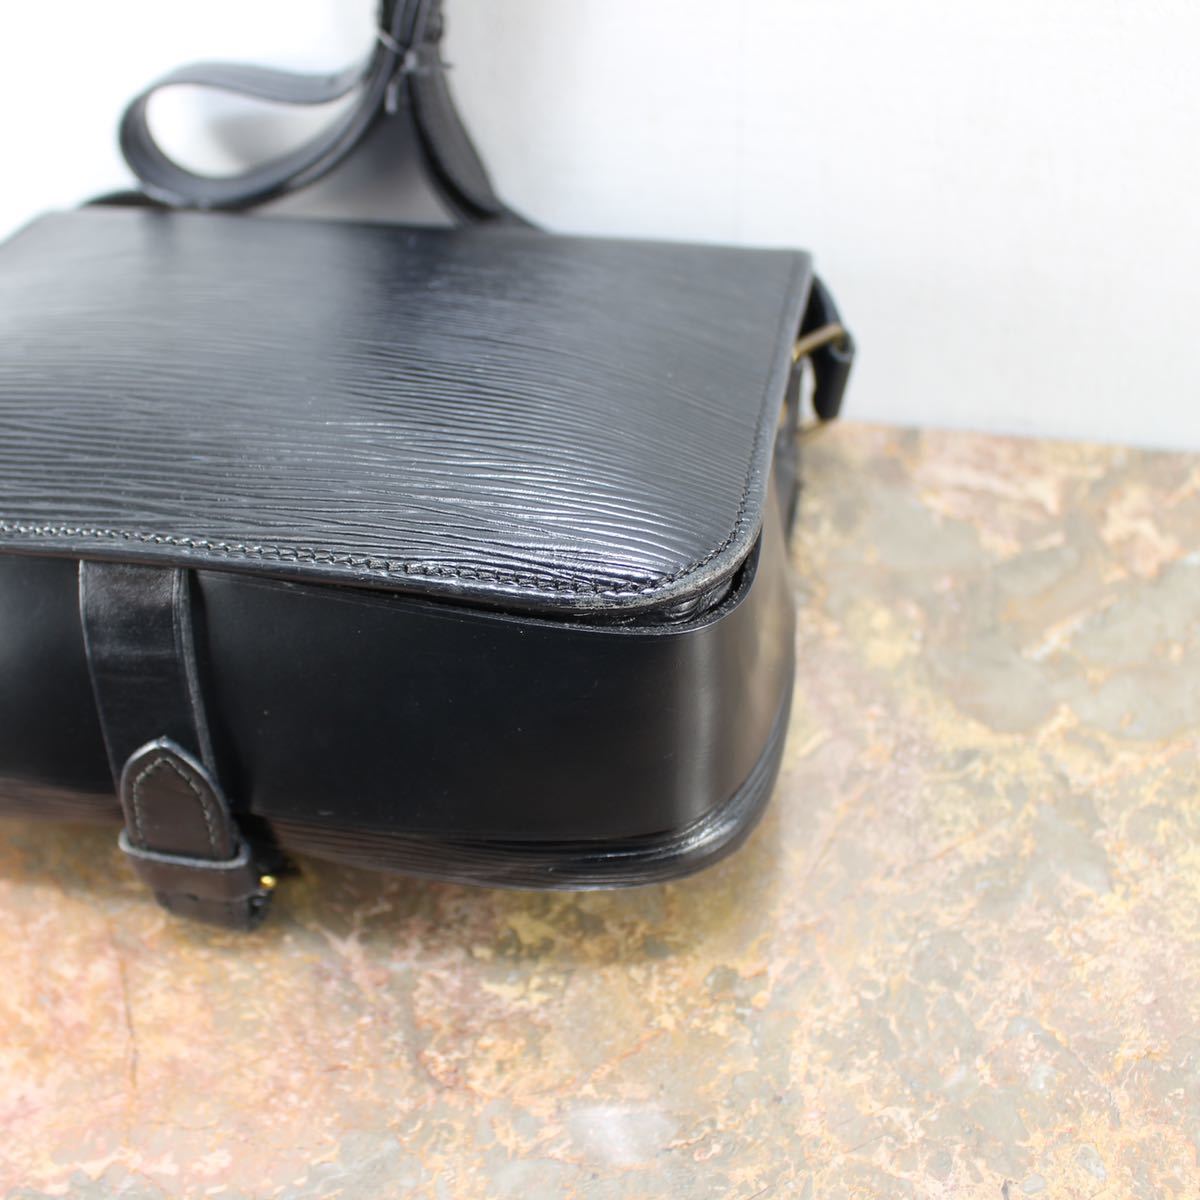 LOUIS VUITTON M52192 MI8909 LEATHER SHOULDER BAG MADE IN FRANCE/ルイヴィトンエピサンクルーレザーショルダーバッグ